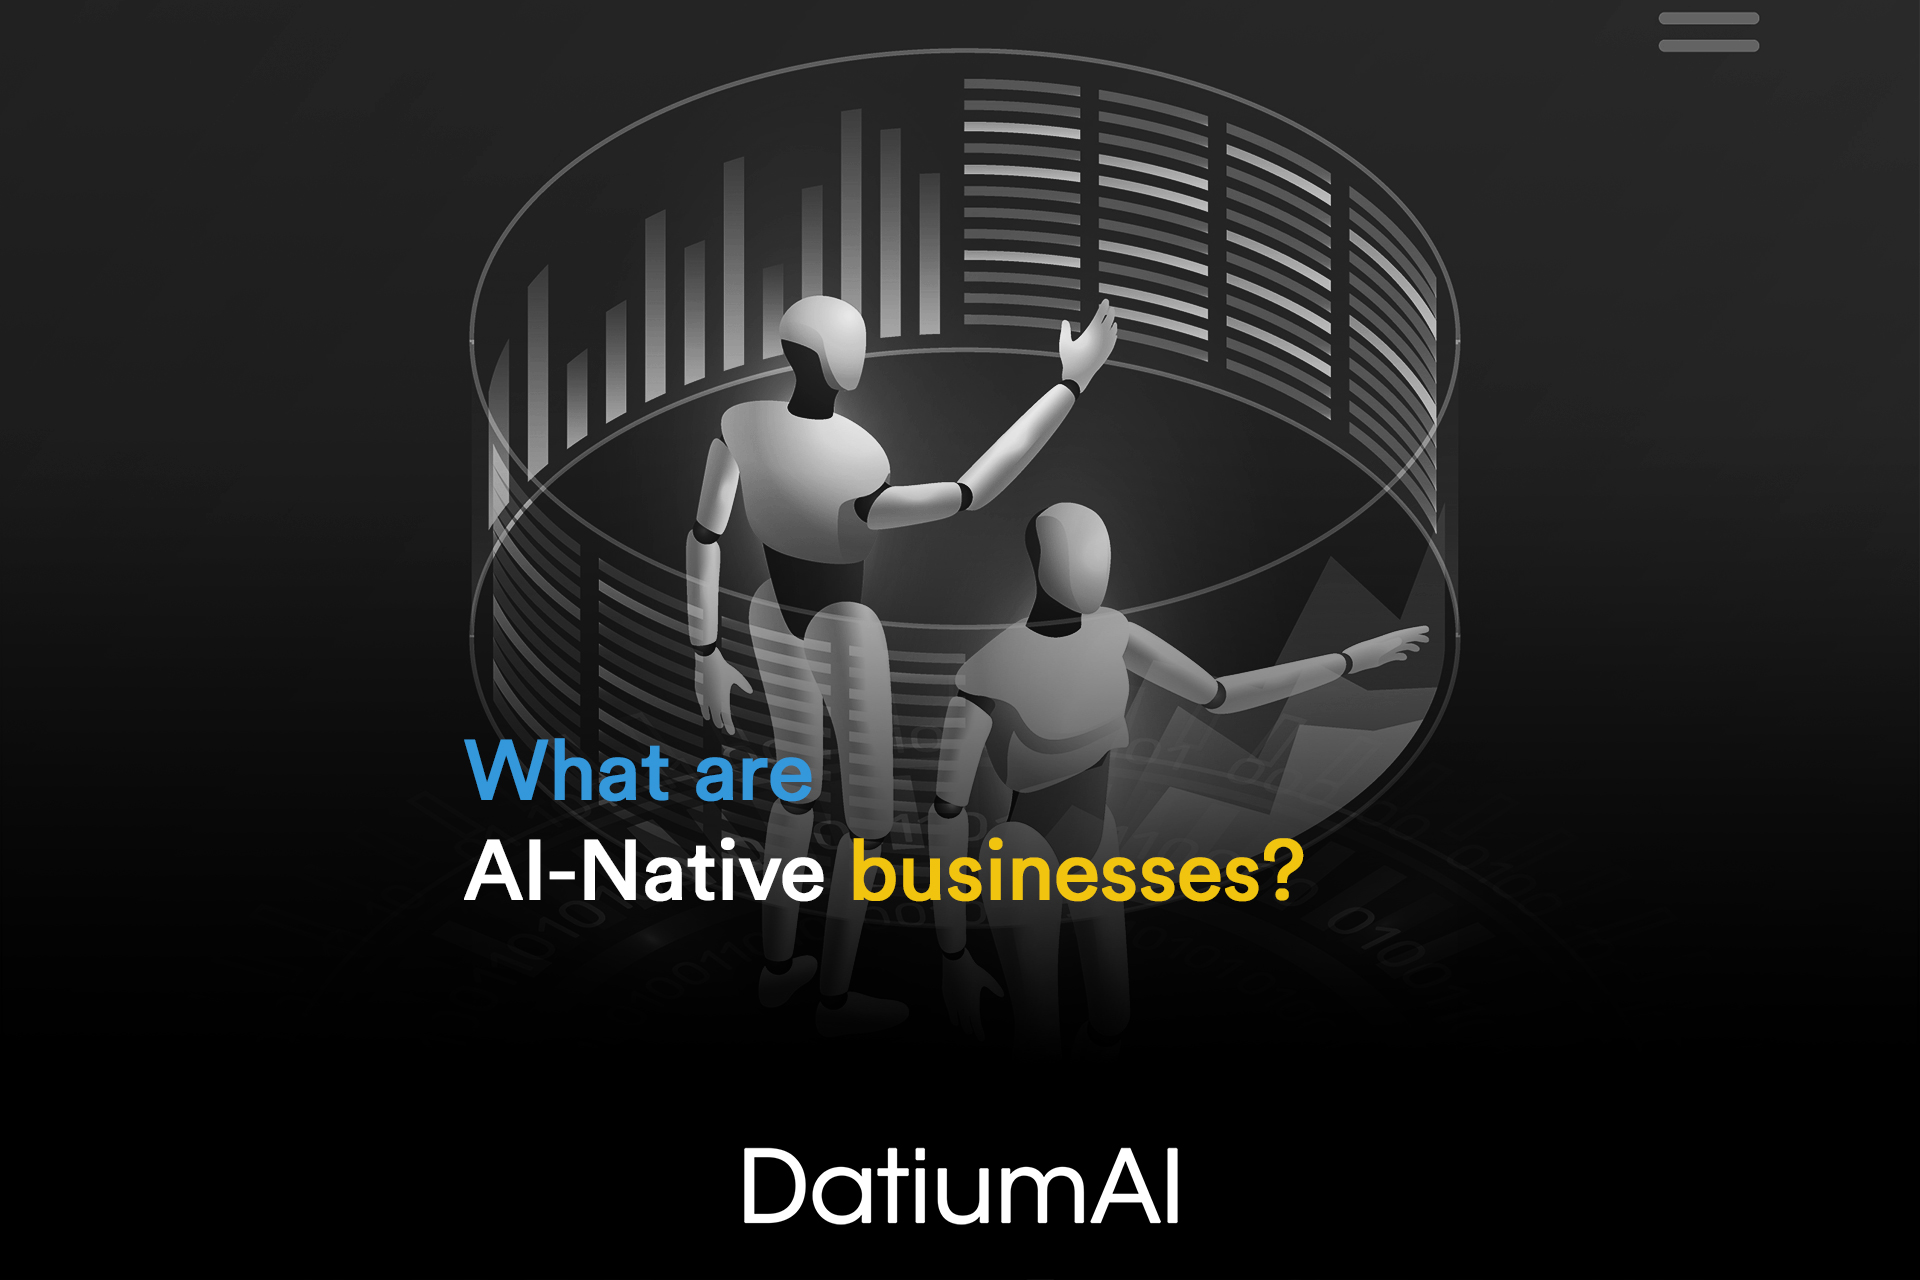 What are AI-Native businesses?